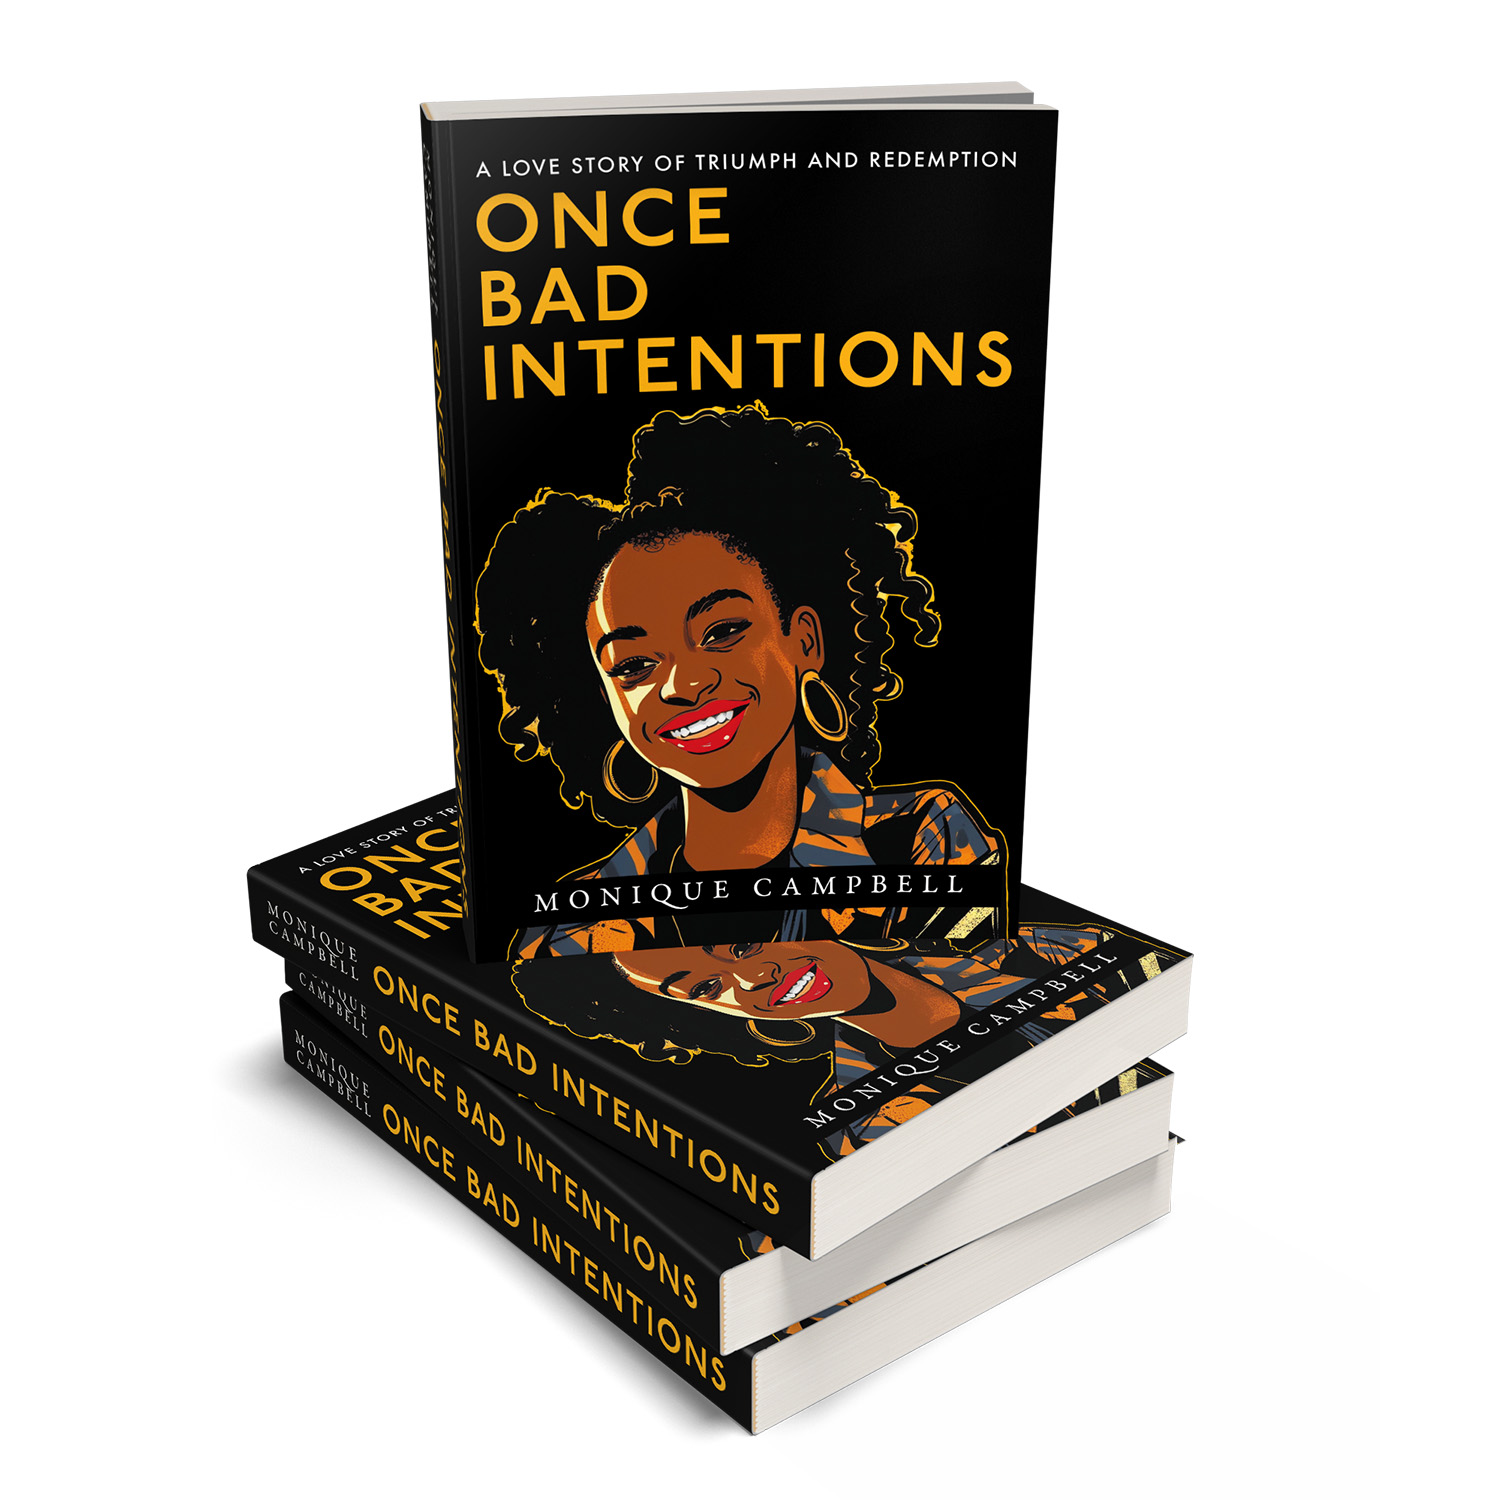 'Once Bad Intentions' is an immersive urban coming-of-age novel set in early 90s London. The author is Monique Campbell. The book cover and interior formatting were designed by Mark Thomas of coverness.com. To find out more about my book design services, please visit www.coverness.com